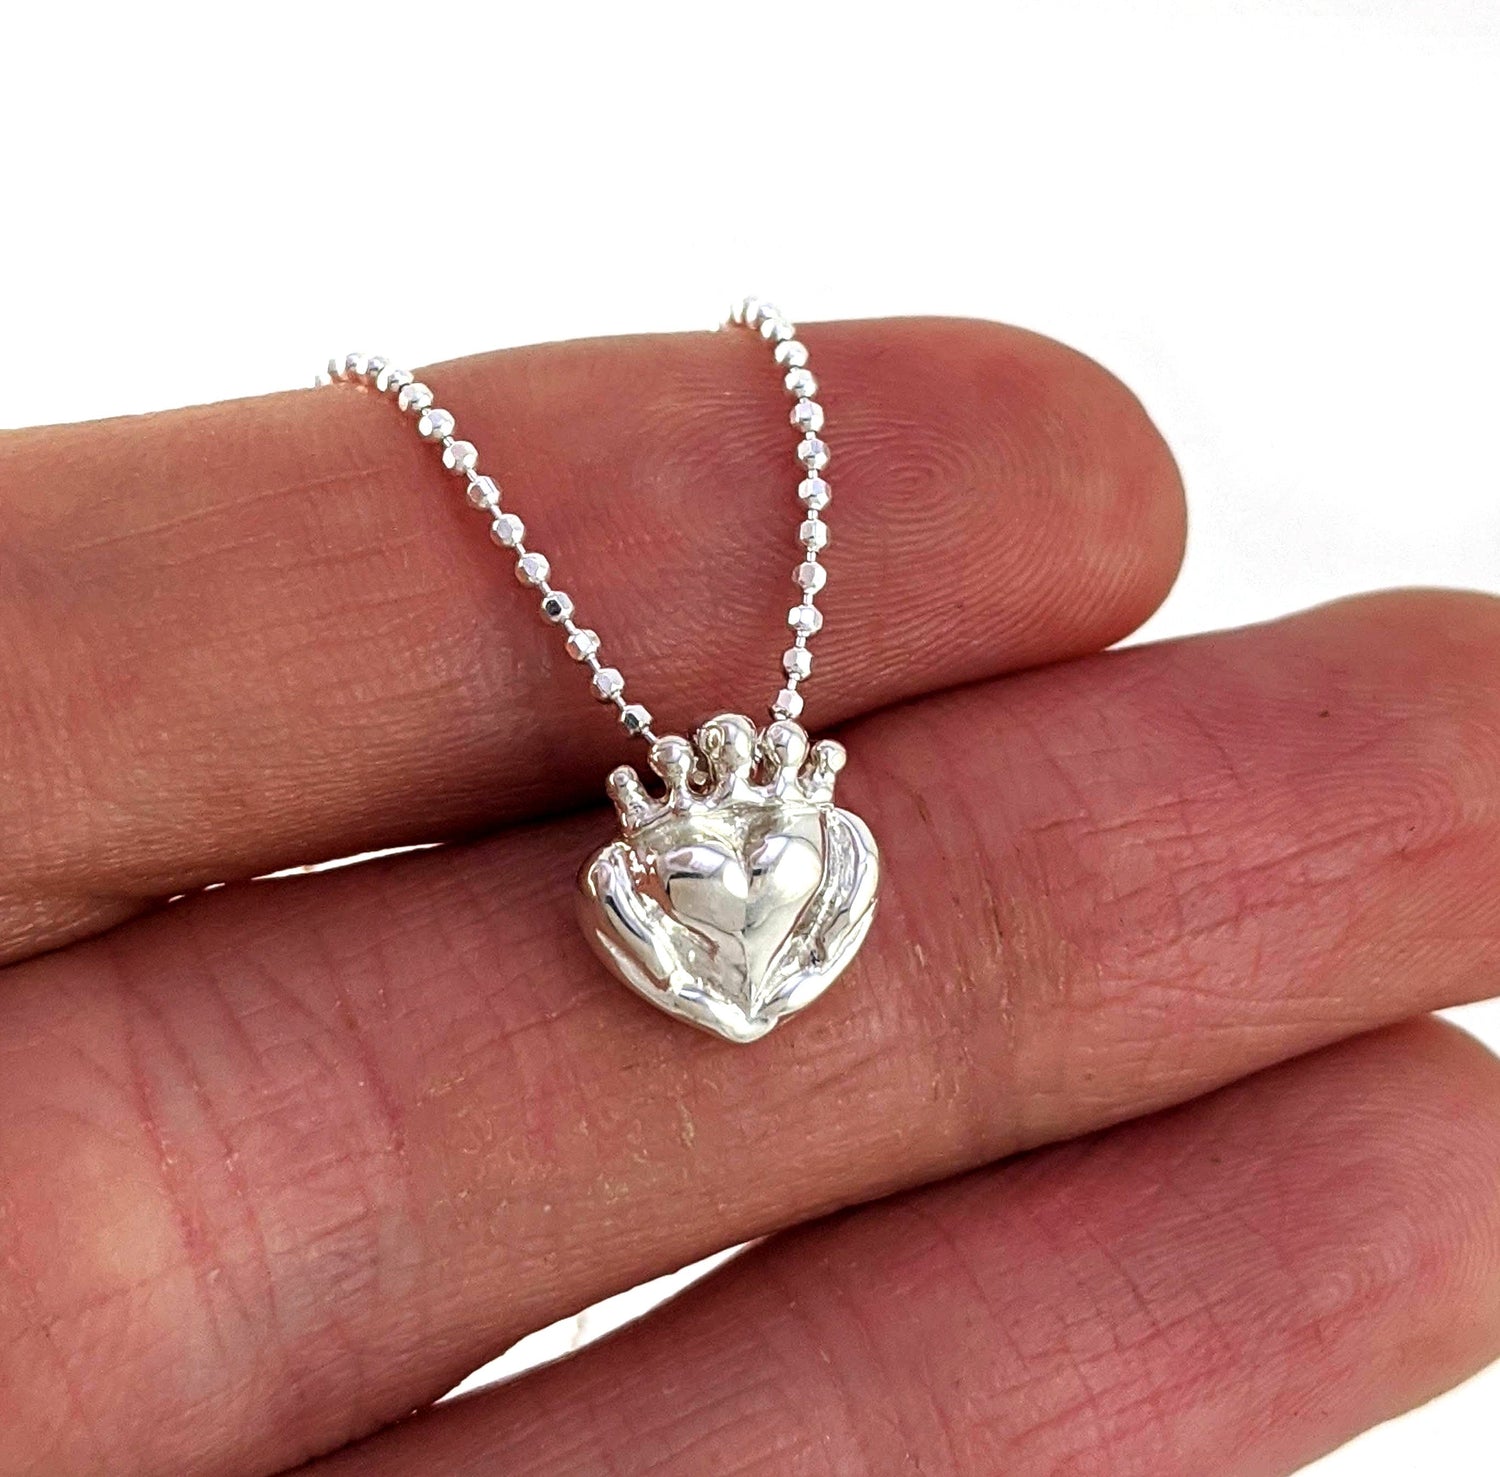 Handmade Claddagh Necklace - Ready to Ship, Claddagh pendant, Sterling Claddagh, Celtic Jewelry, Irish Promise Pendant, Gift for her 267 12